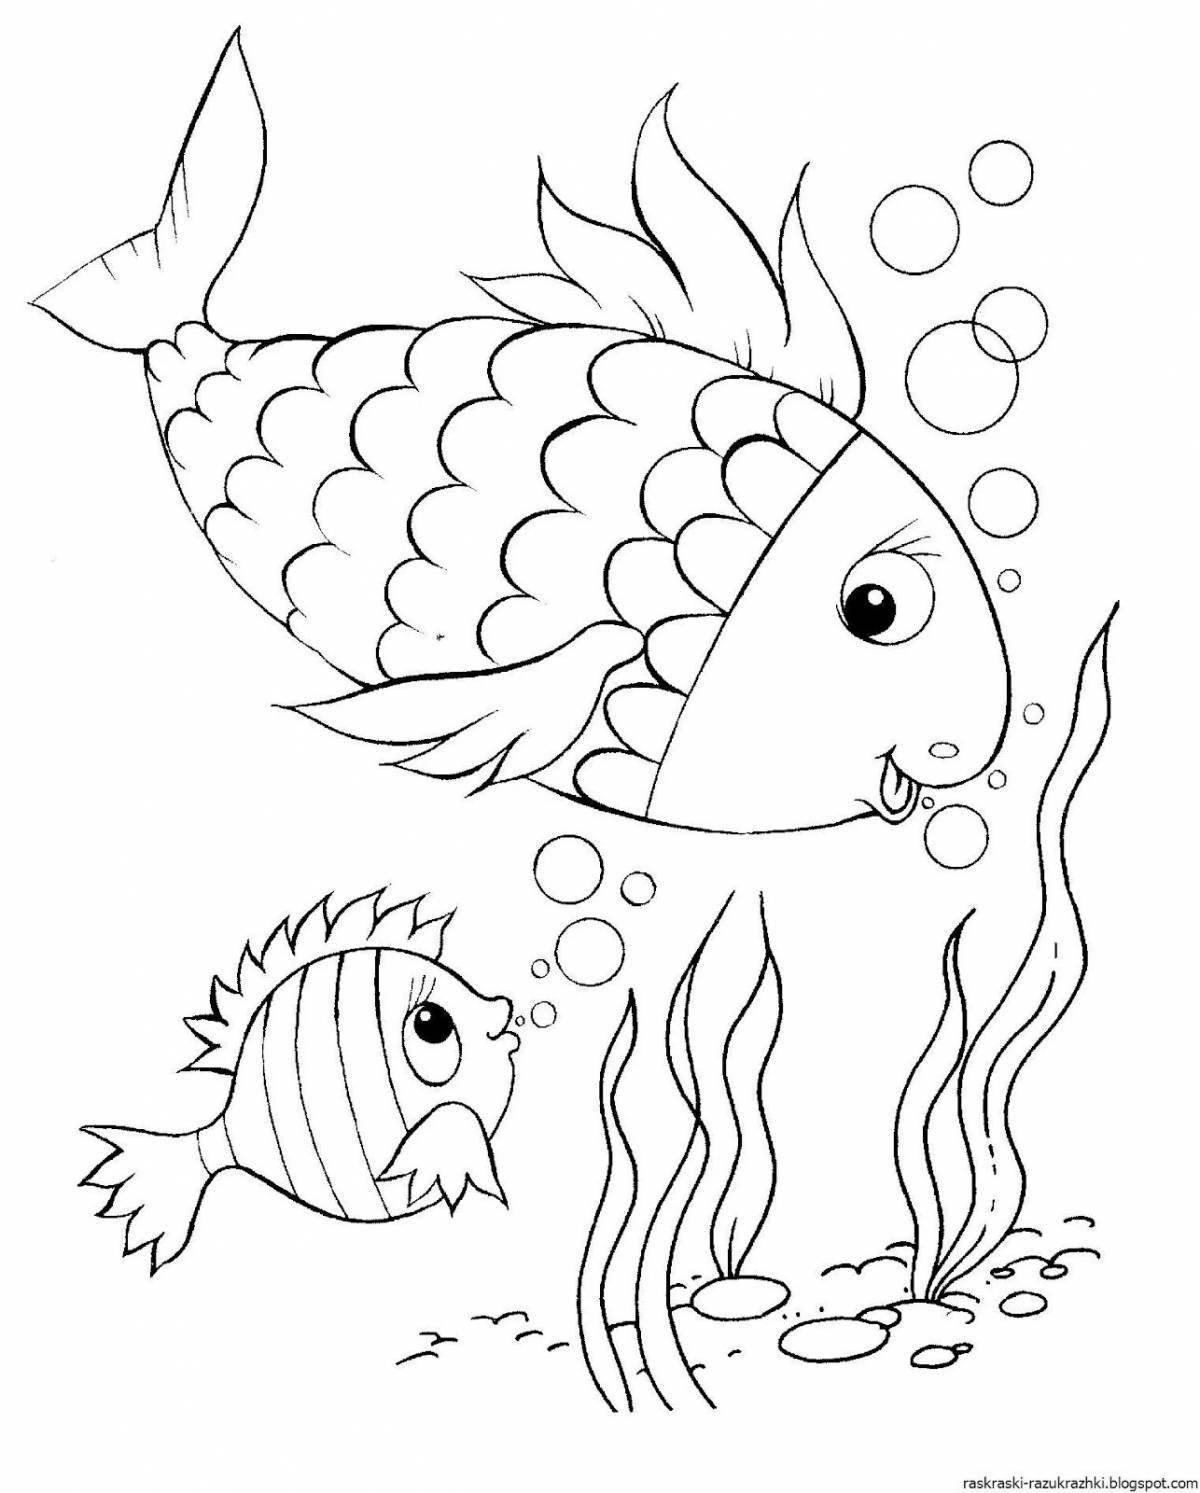 Sweet fish coloring book for 3-4 year olds